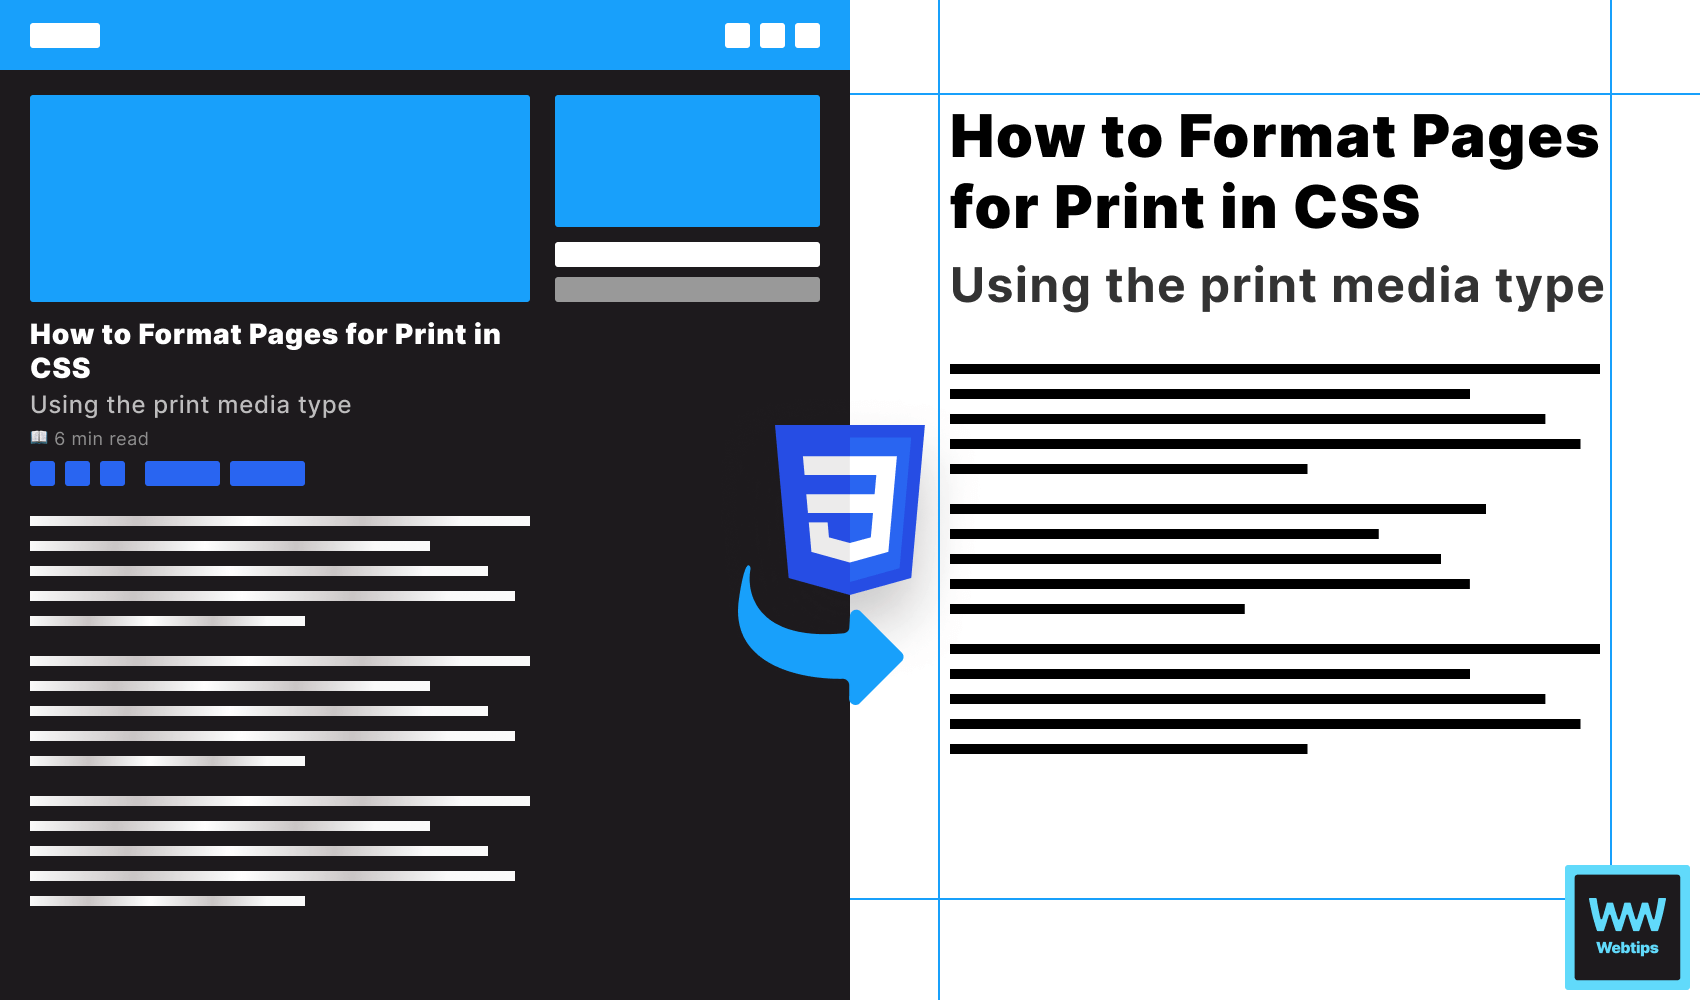 How to Format Pages for Print in CSS